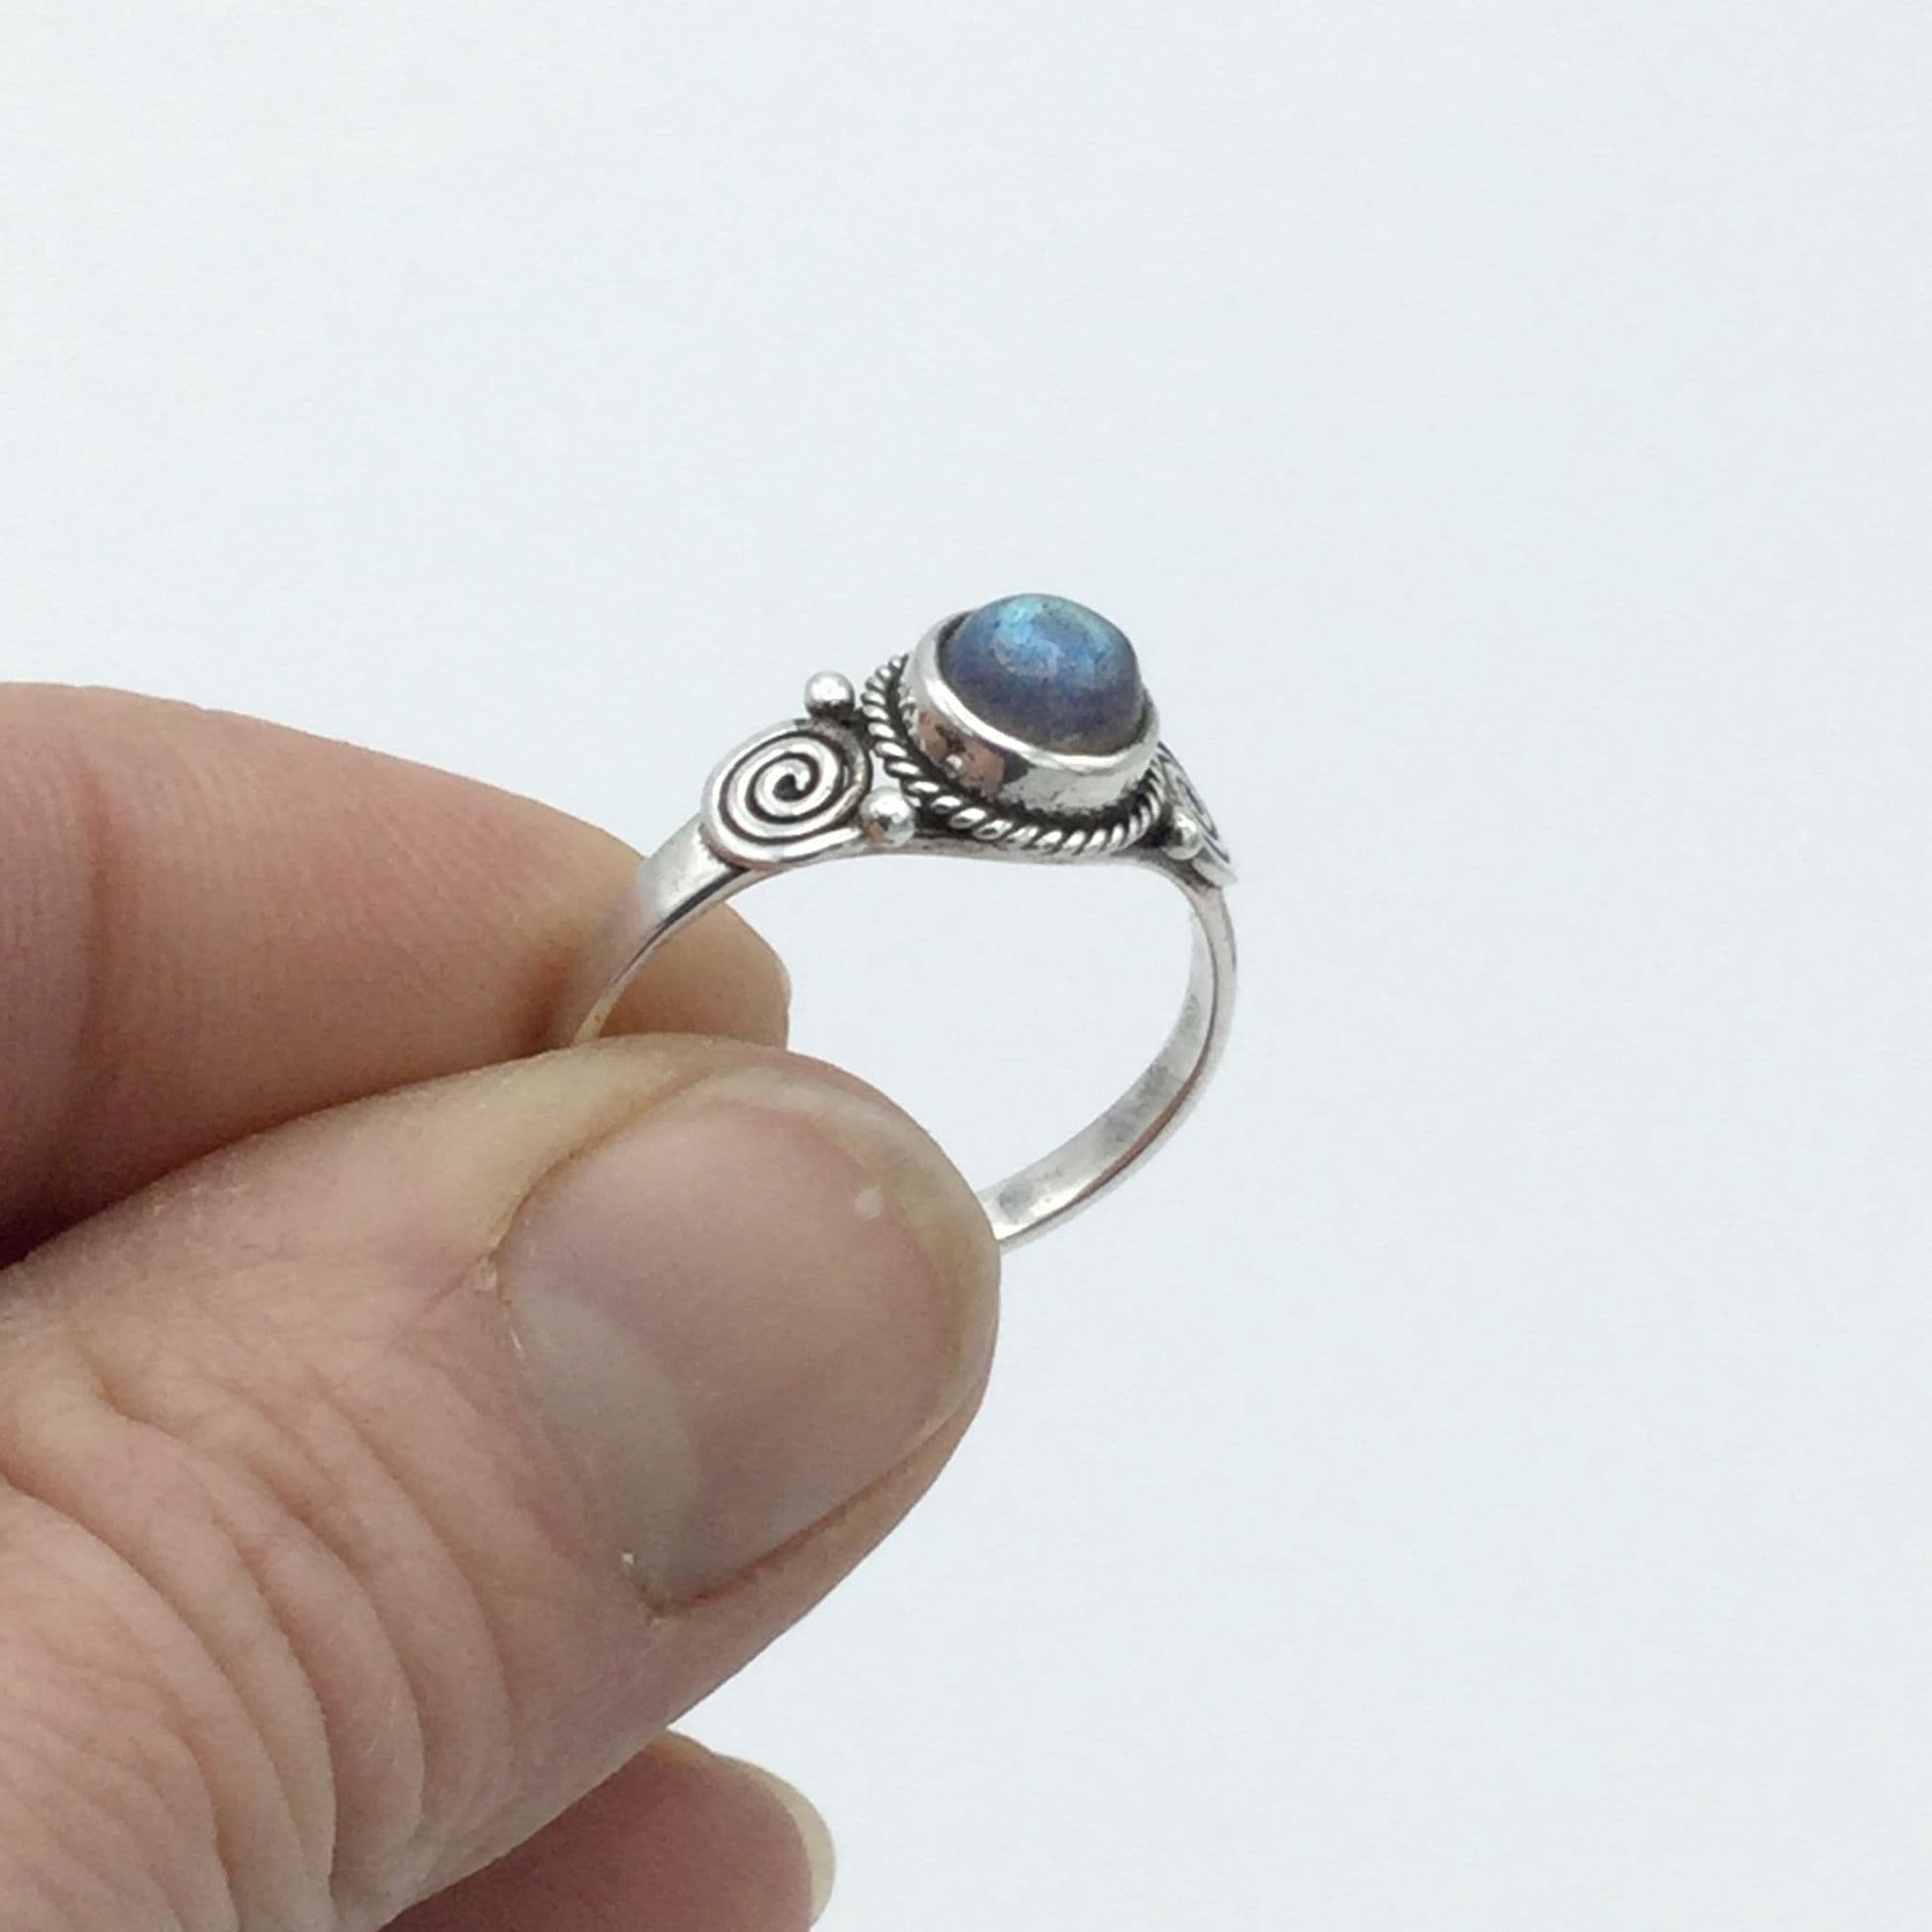 A blue moonstone silver ring held in fingers